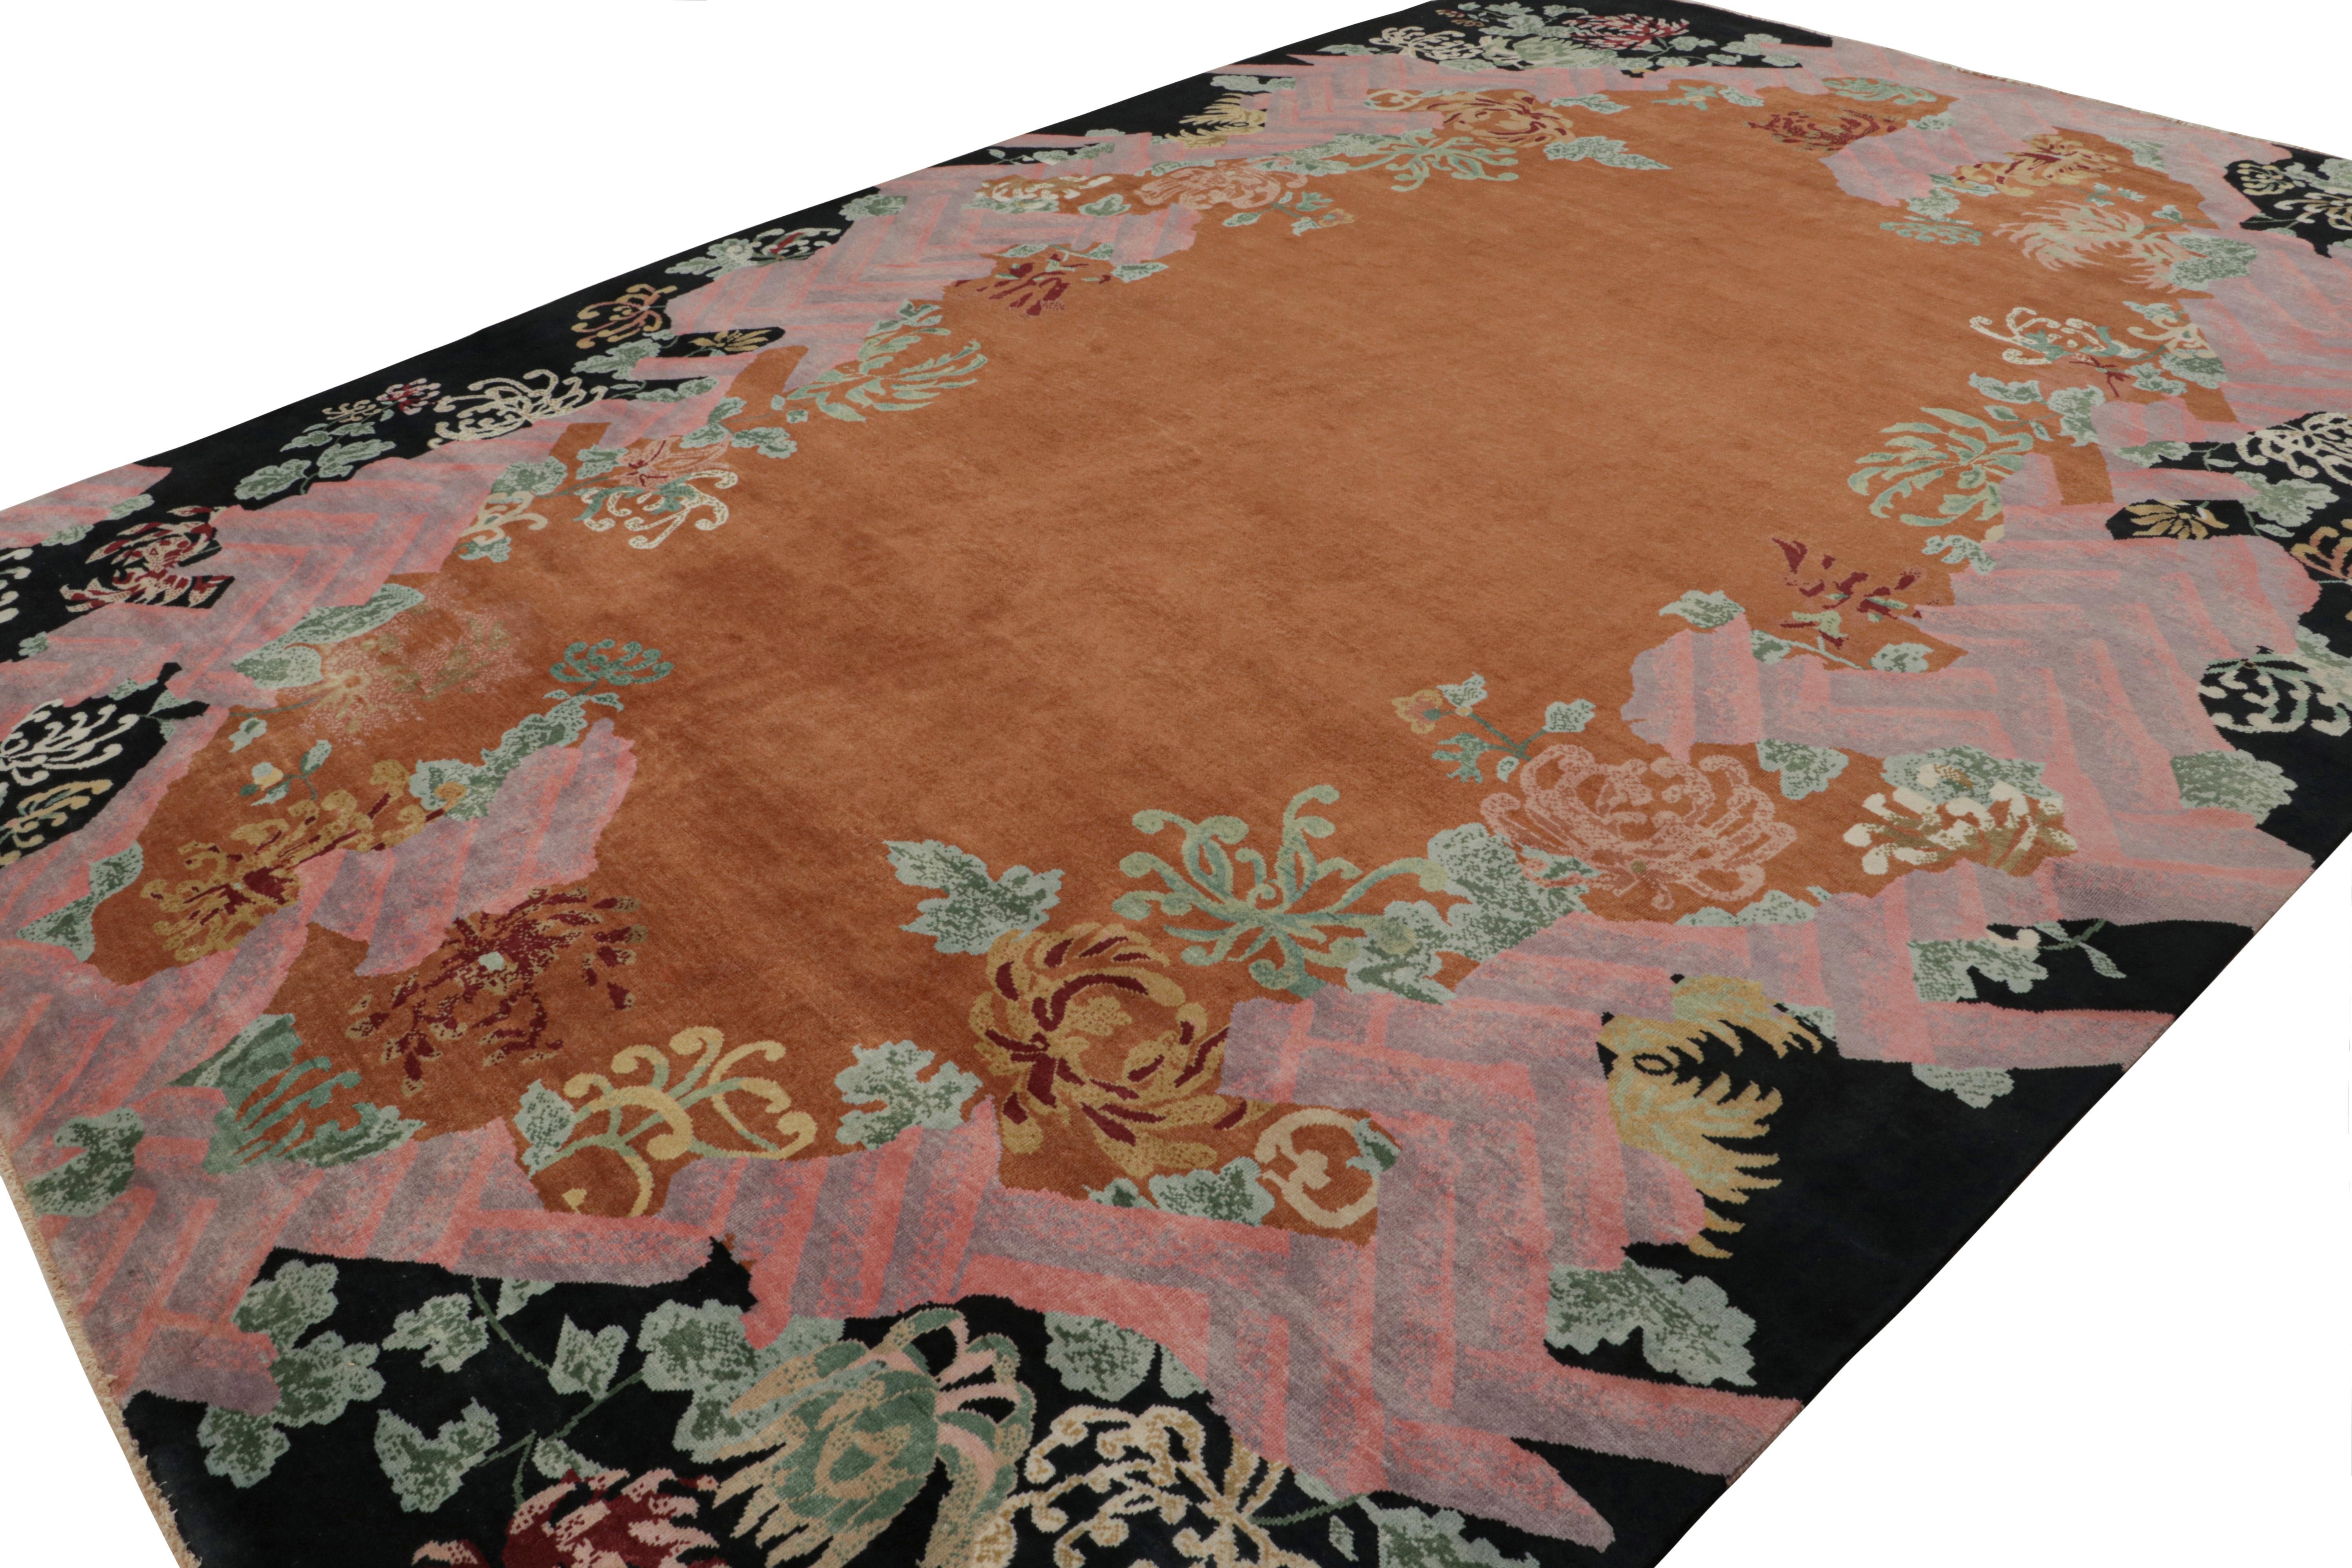 Hand knotted in wool, a 10x14 Chinese art deco style rug inspired by rare period pieces of the 1920s Nichols style. 

On the Design: 

The design boasts an eccentric open field from this period. The field & the surrounding floral patterns enjoy a